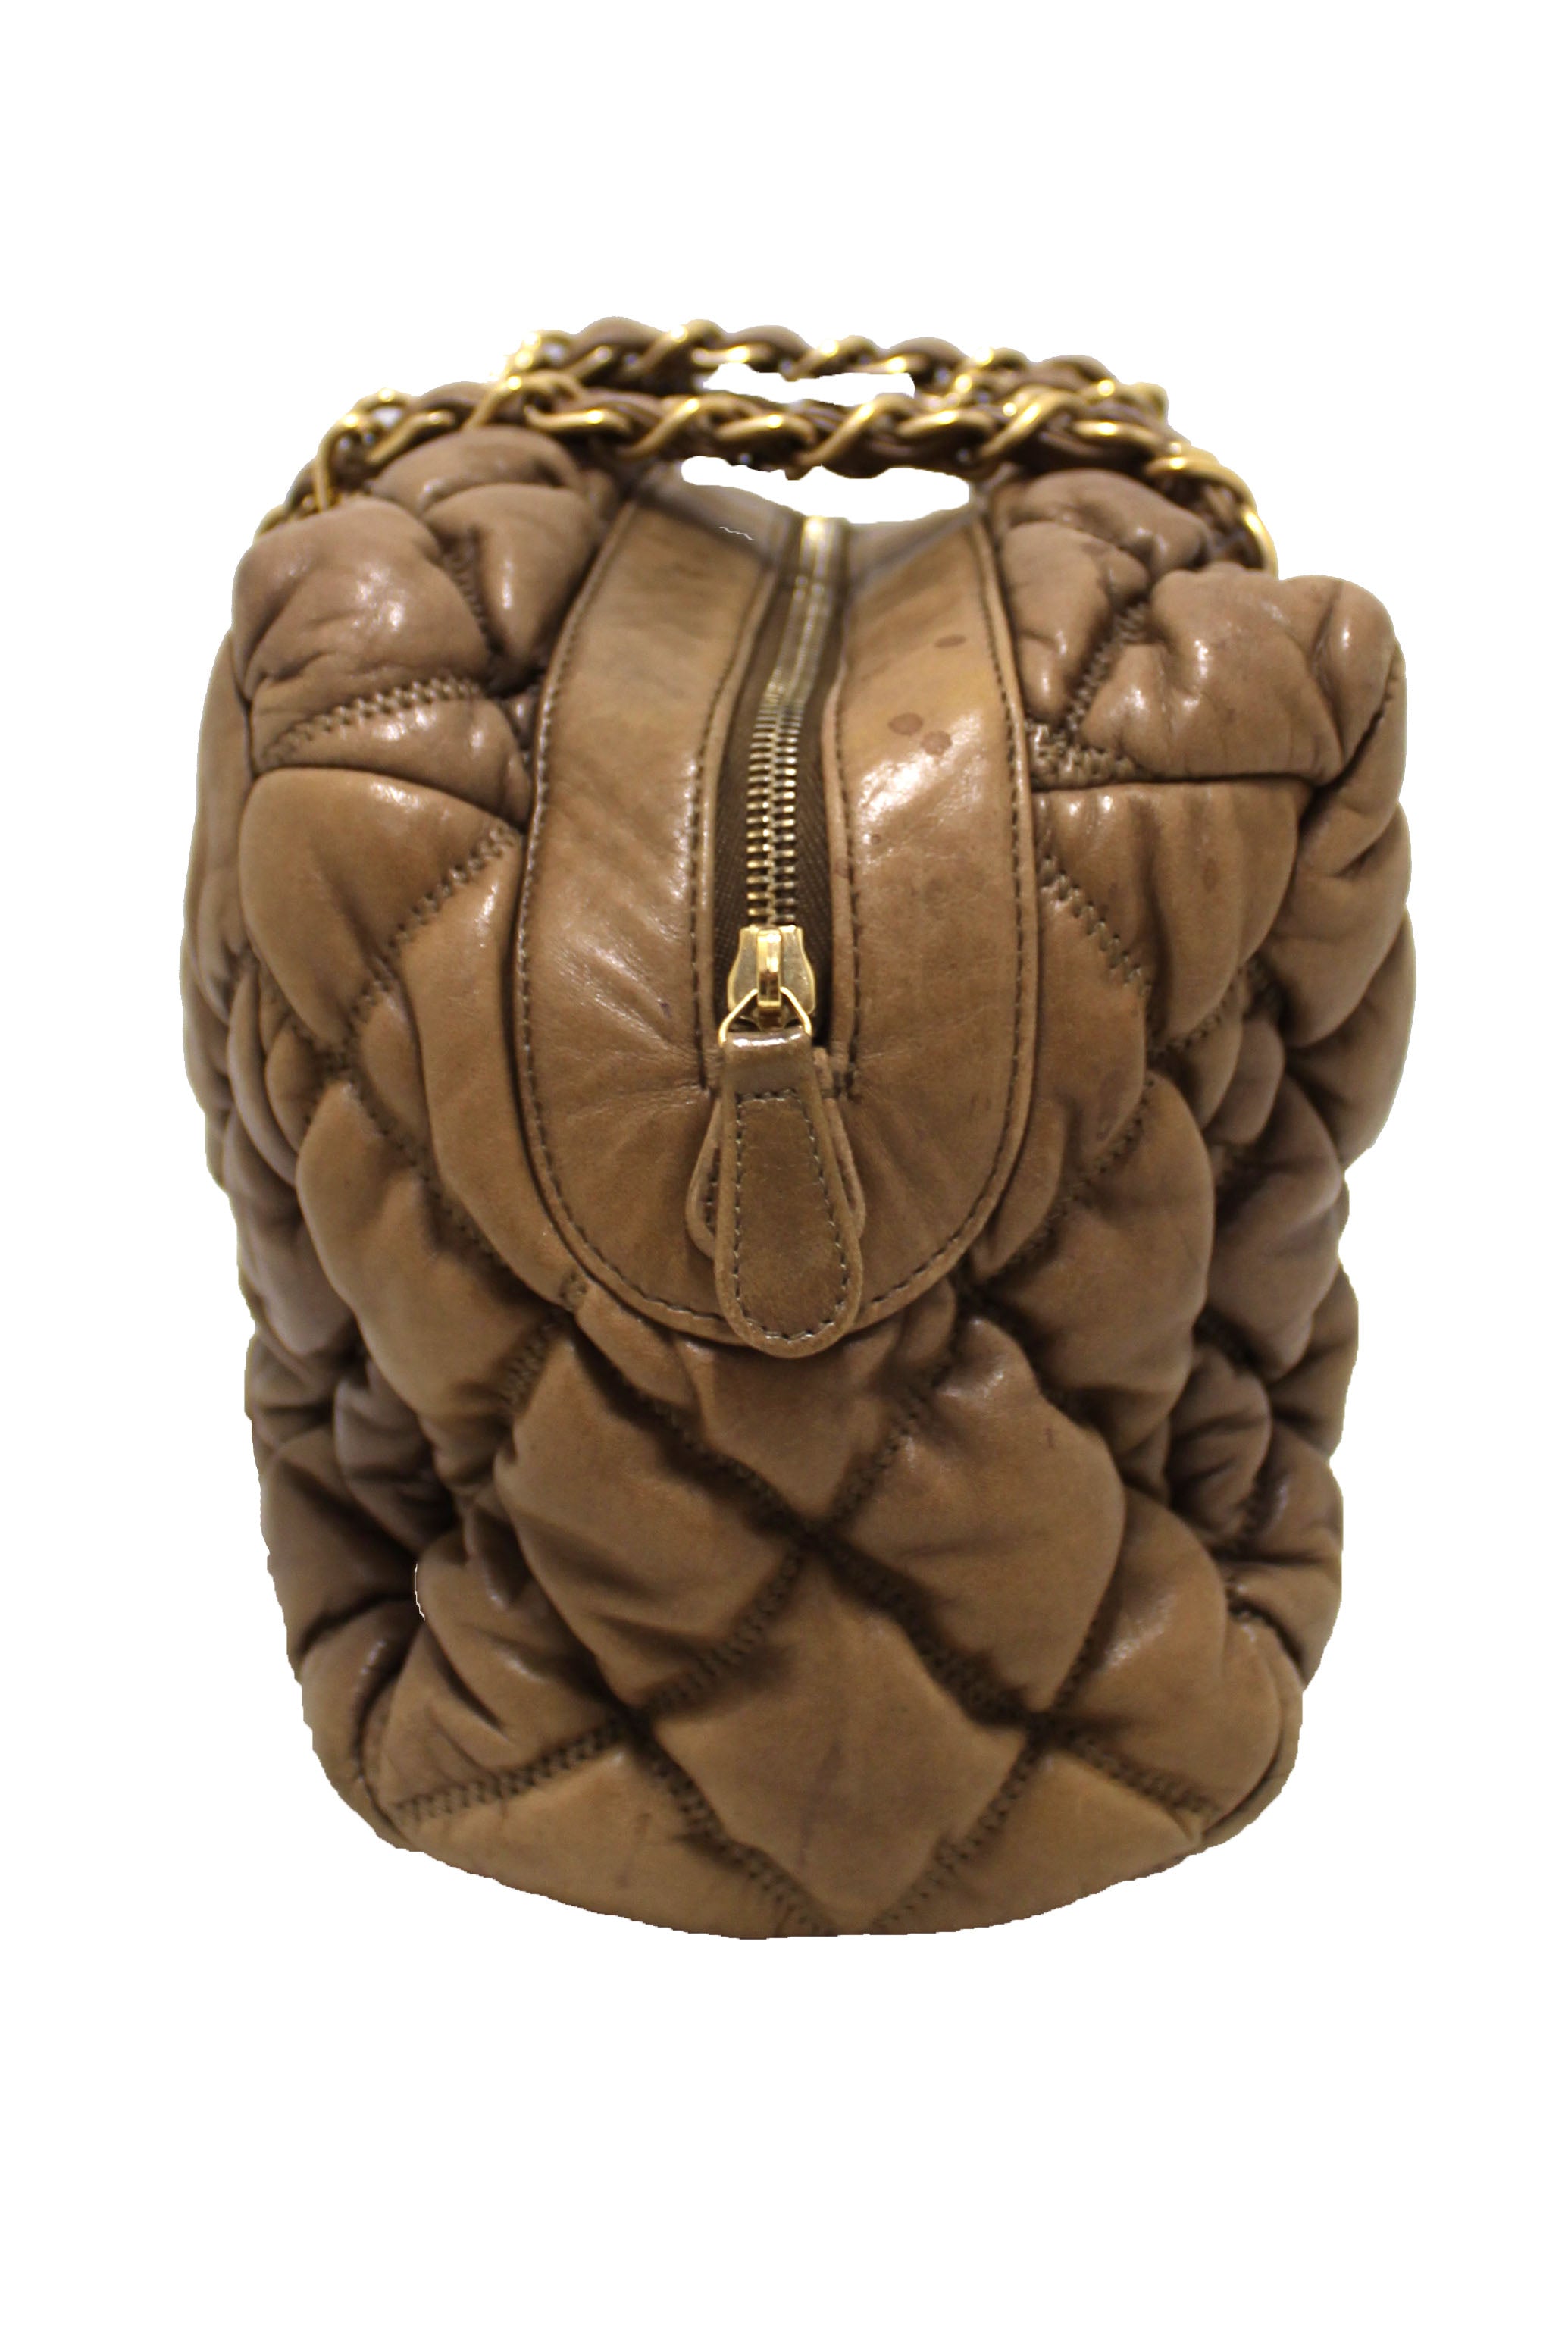 Authentic Chanel Beige Bubble Quilted Lambskin Leather Bowler Bag